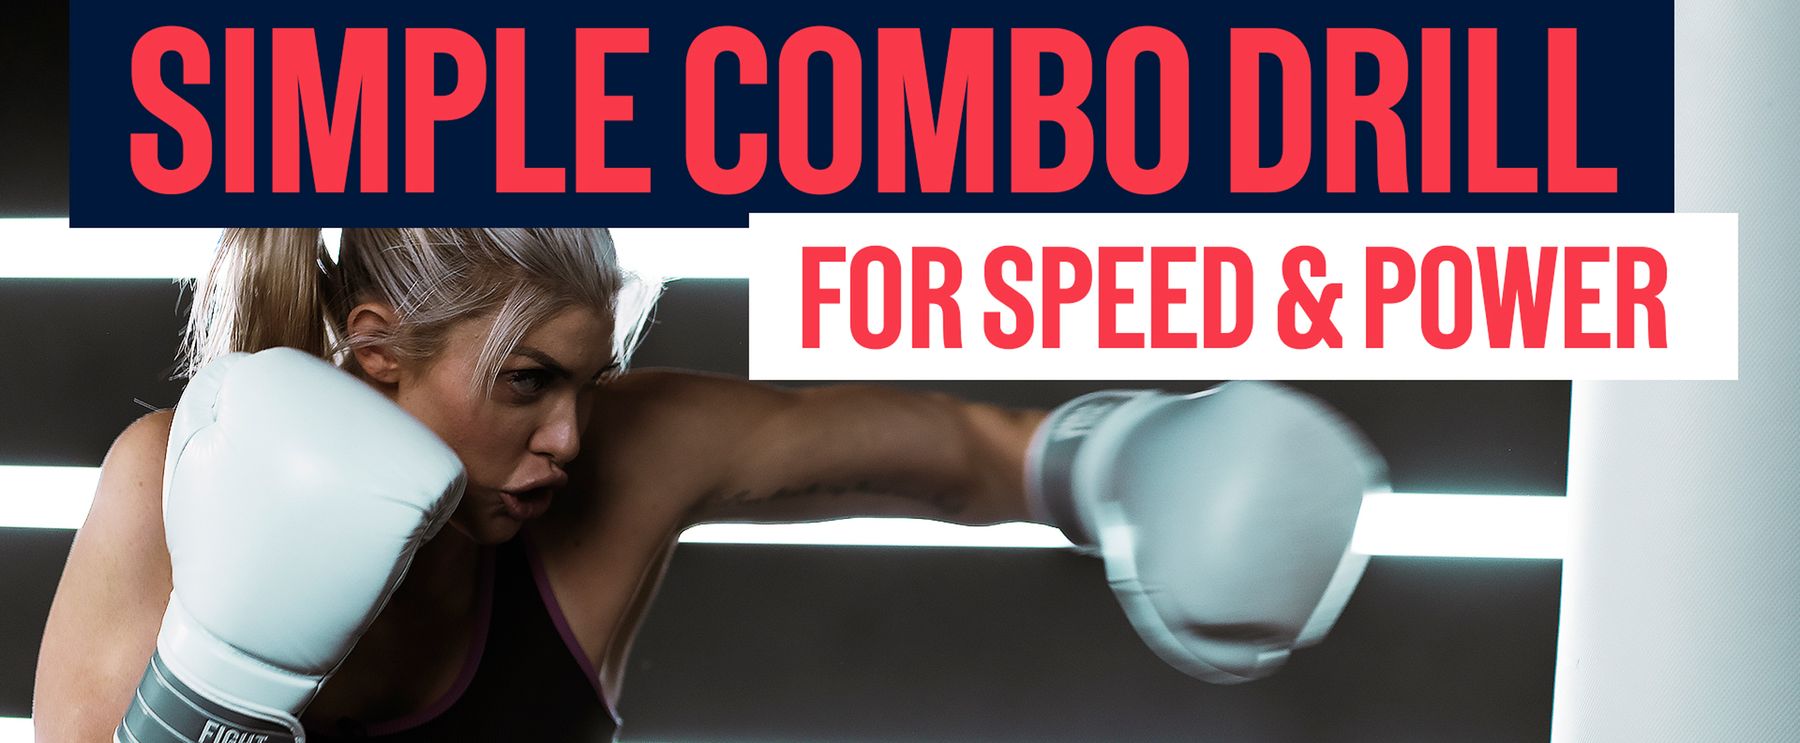 3 Punching Bag Combos for Speed and Power